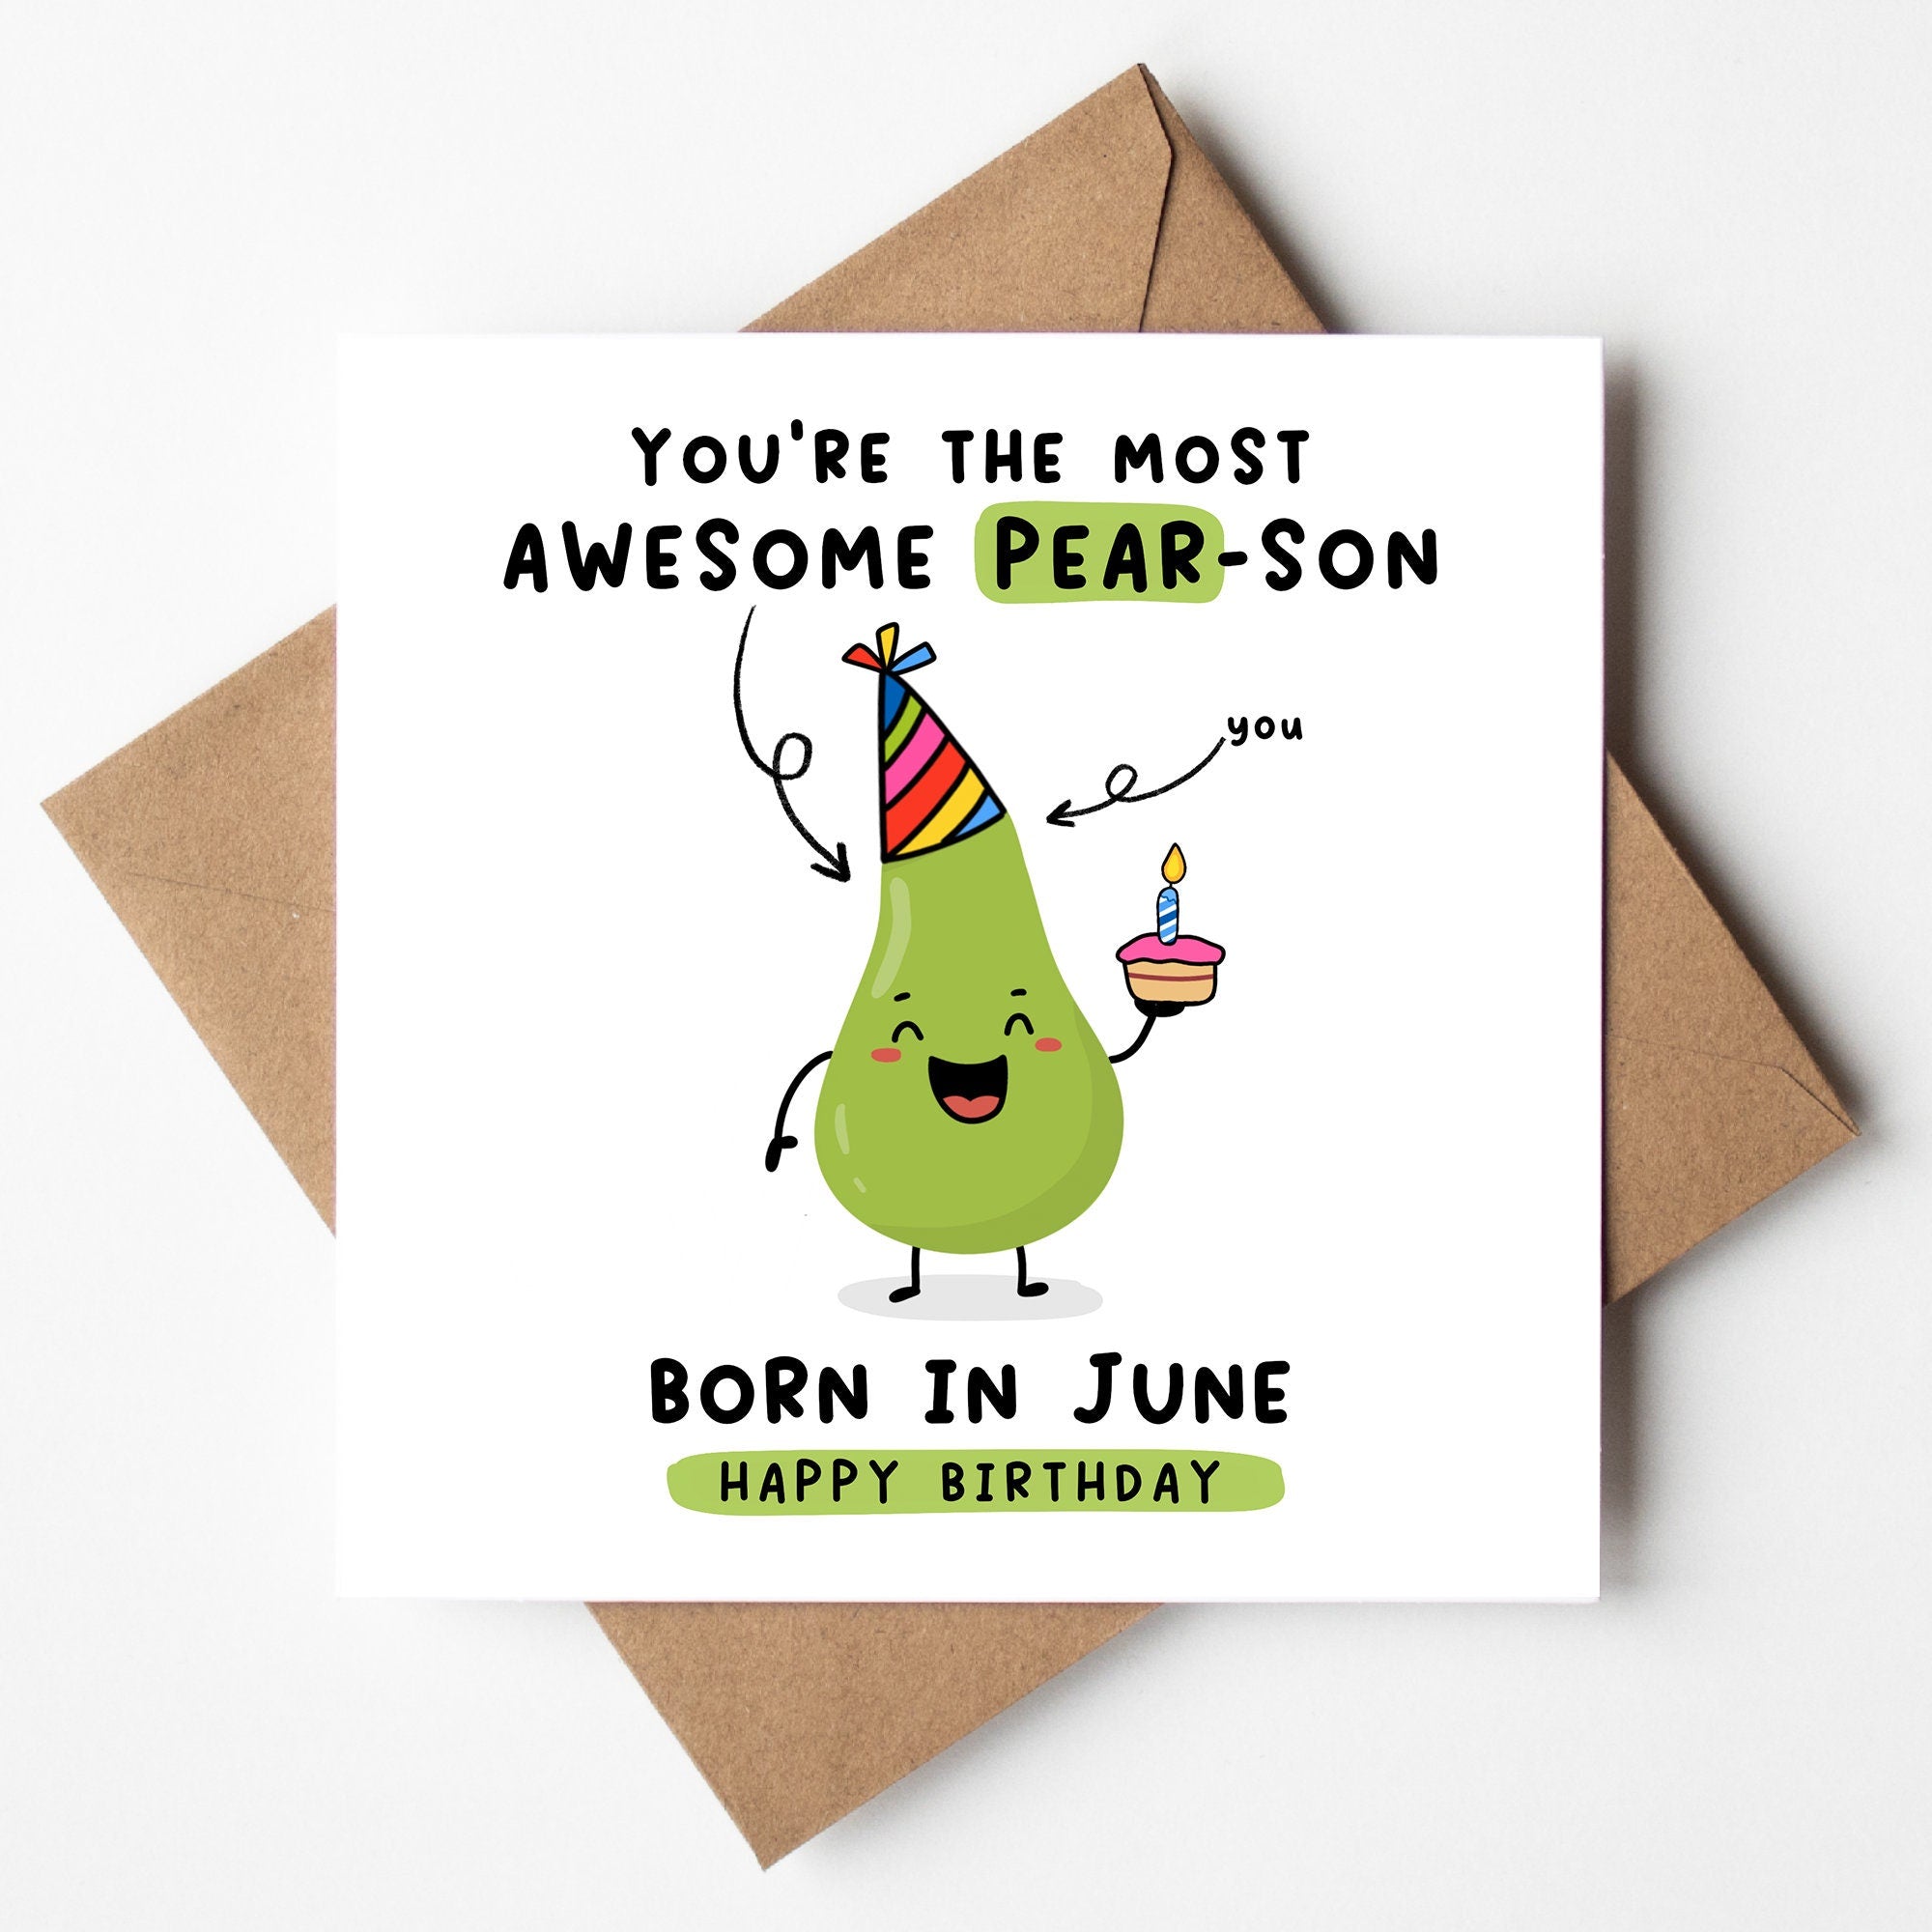 You're The Most Awesome Pear-son born in June, Funny Pun Card, Pear Pun Card, Born In June, Birth Month Card June